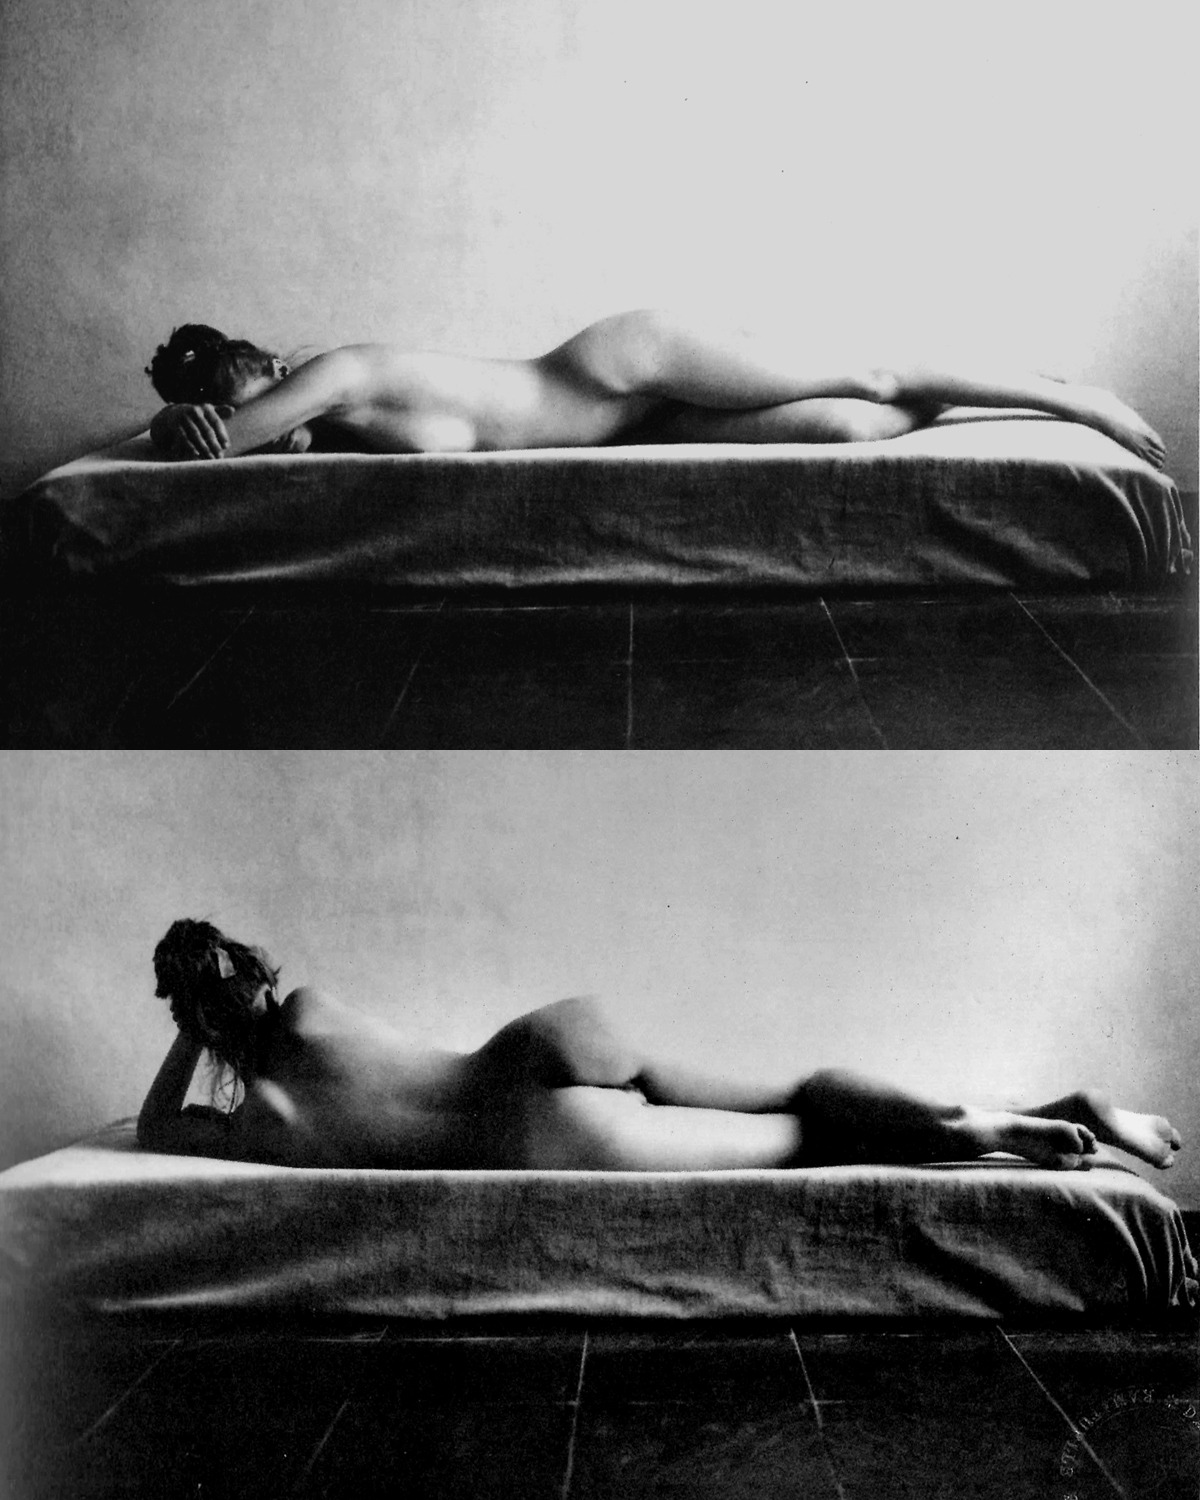 mich-la-chatte:   “The studio couch” and “Posing”, Ramatuelle, 1984 by David